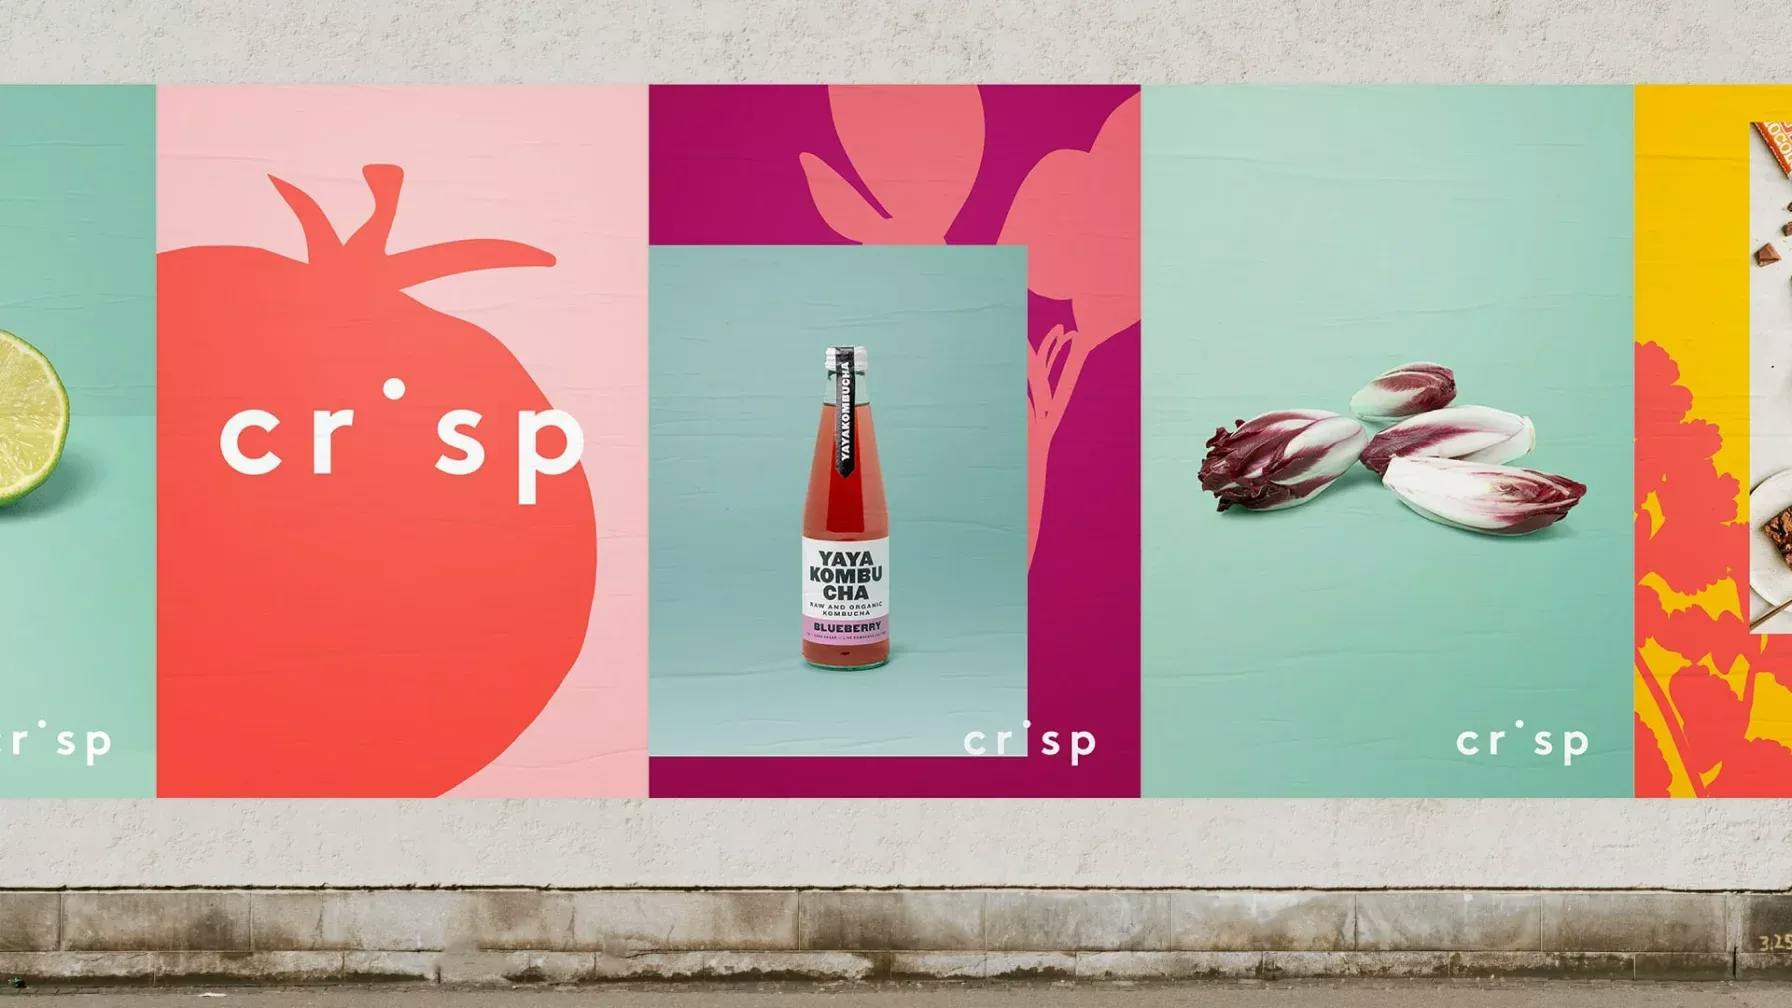 printed advertisements on a wall for crisp 